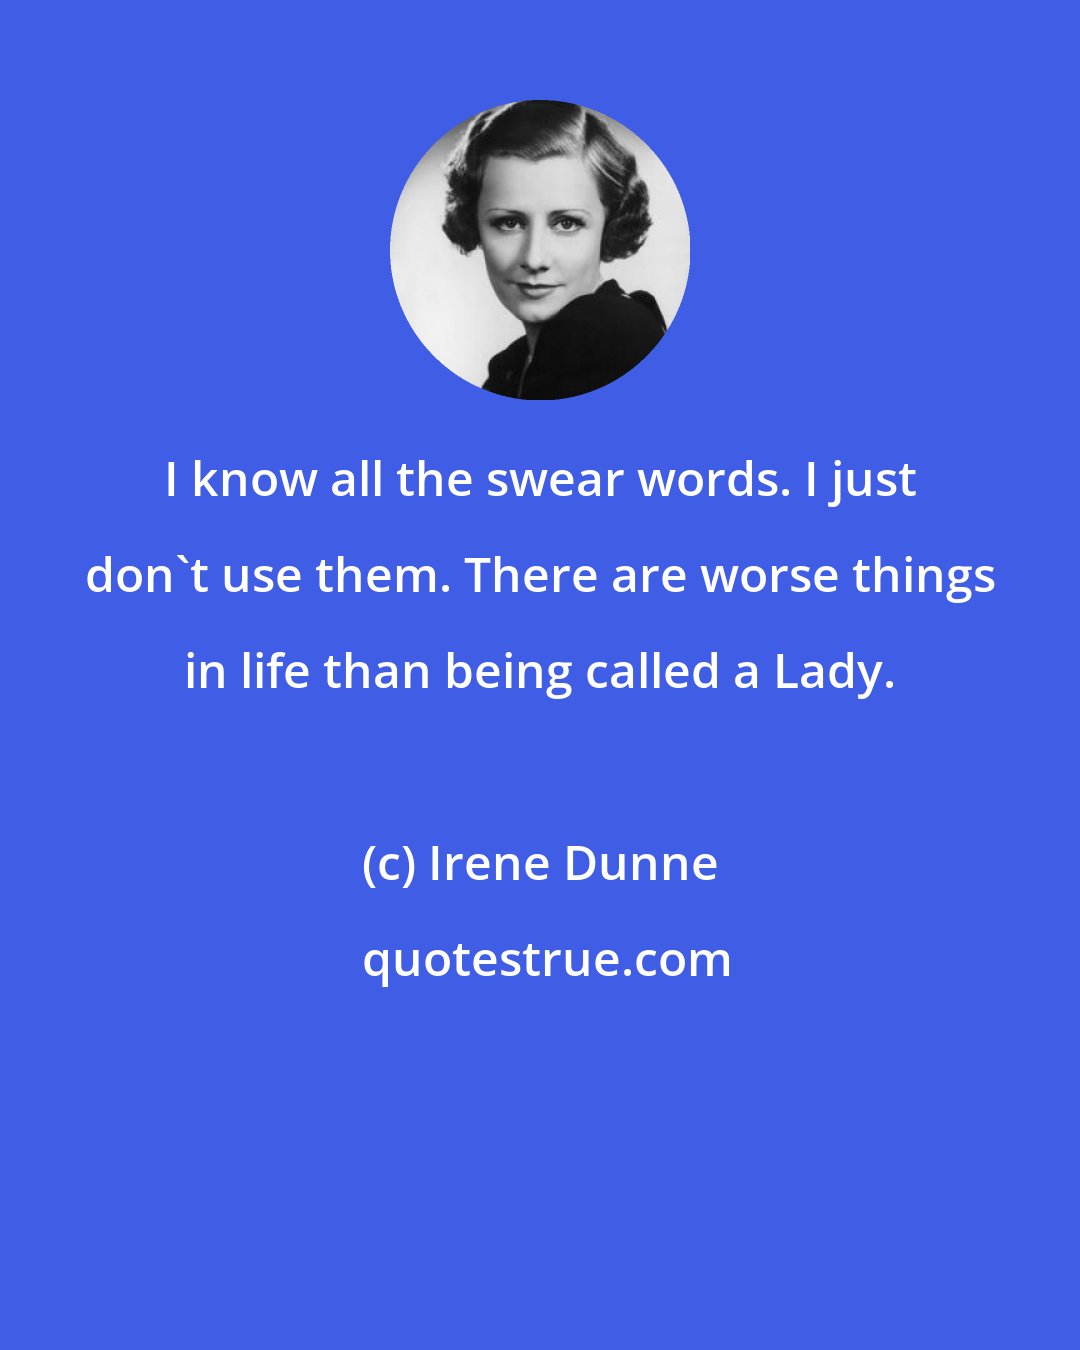 Irene Dunne: I know all the swear words. I just don't use them. There are worse things in life than being called a Lady.